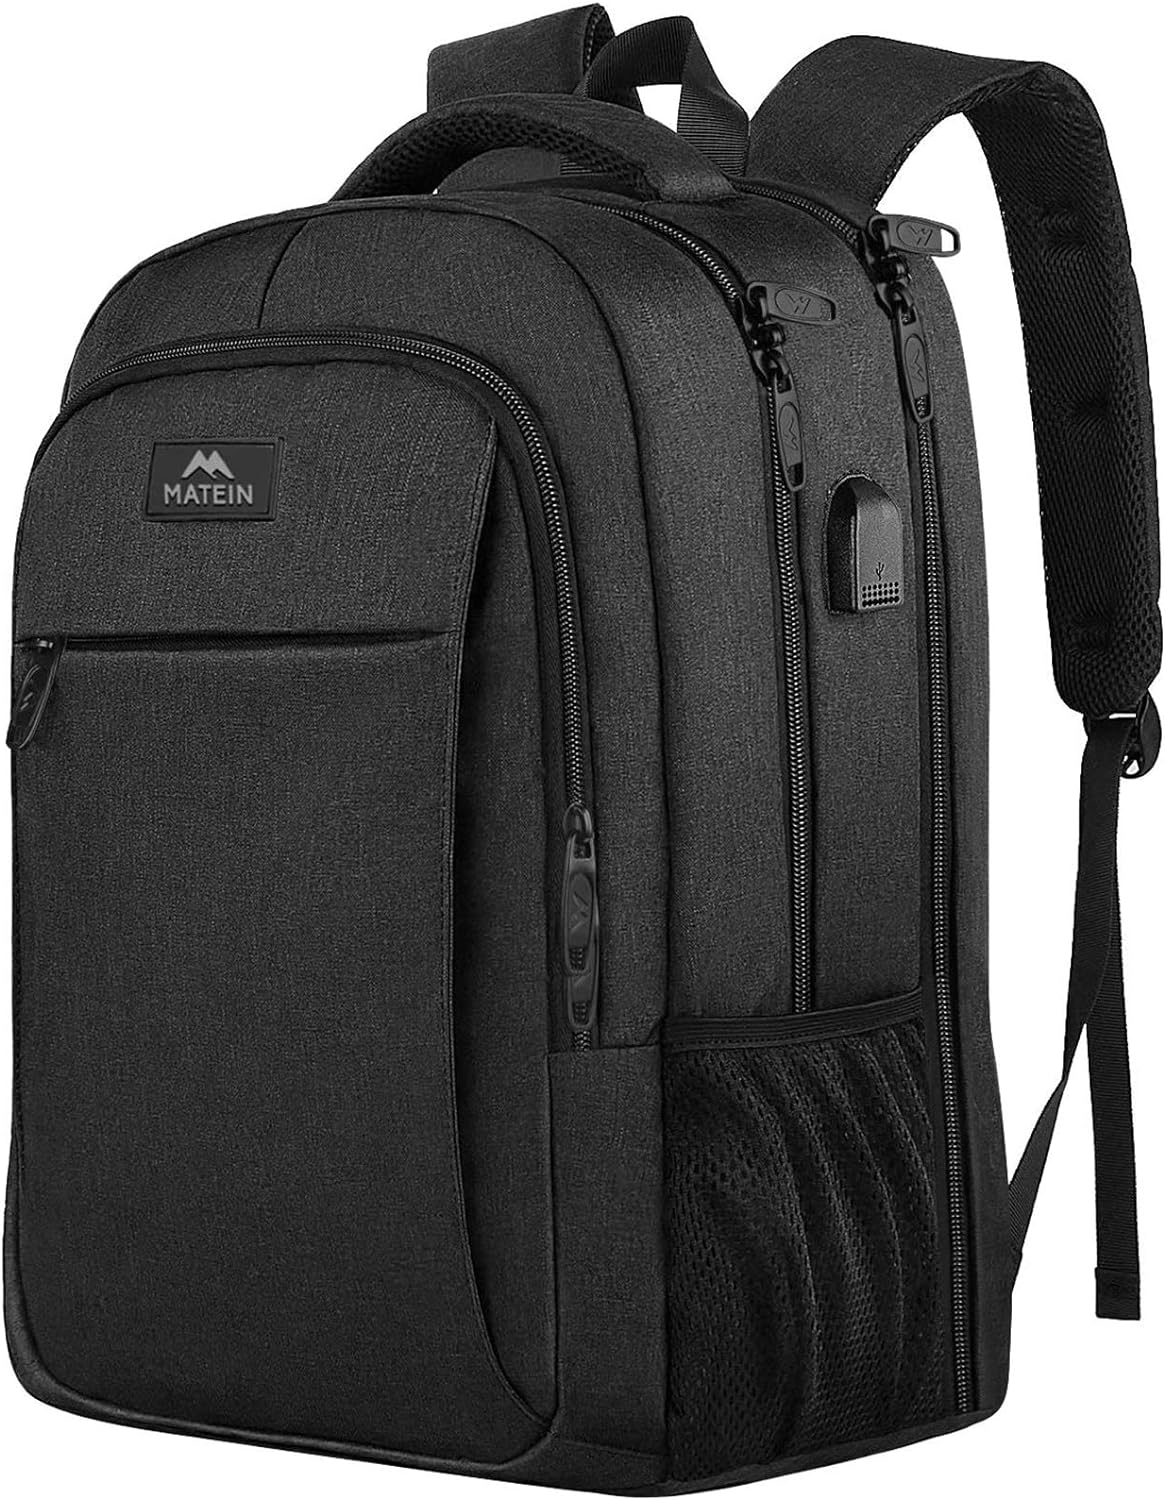 Unisex Lightweight Travel Laptop Backpack, Work Bag with USB Charging ...